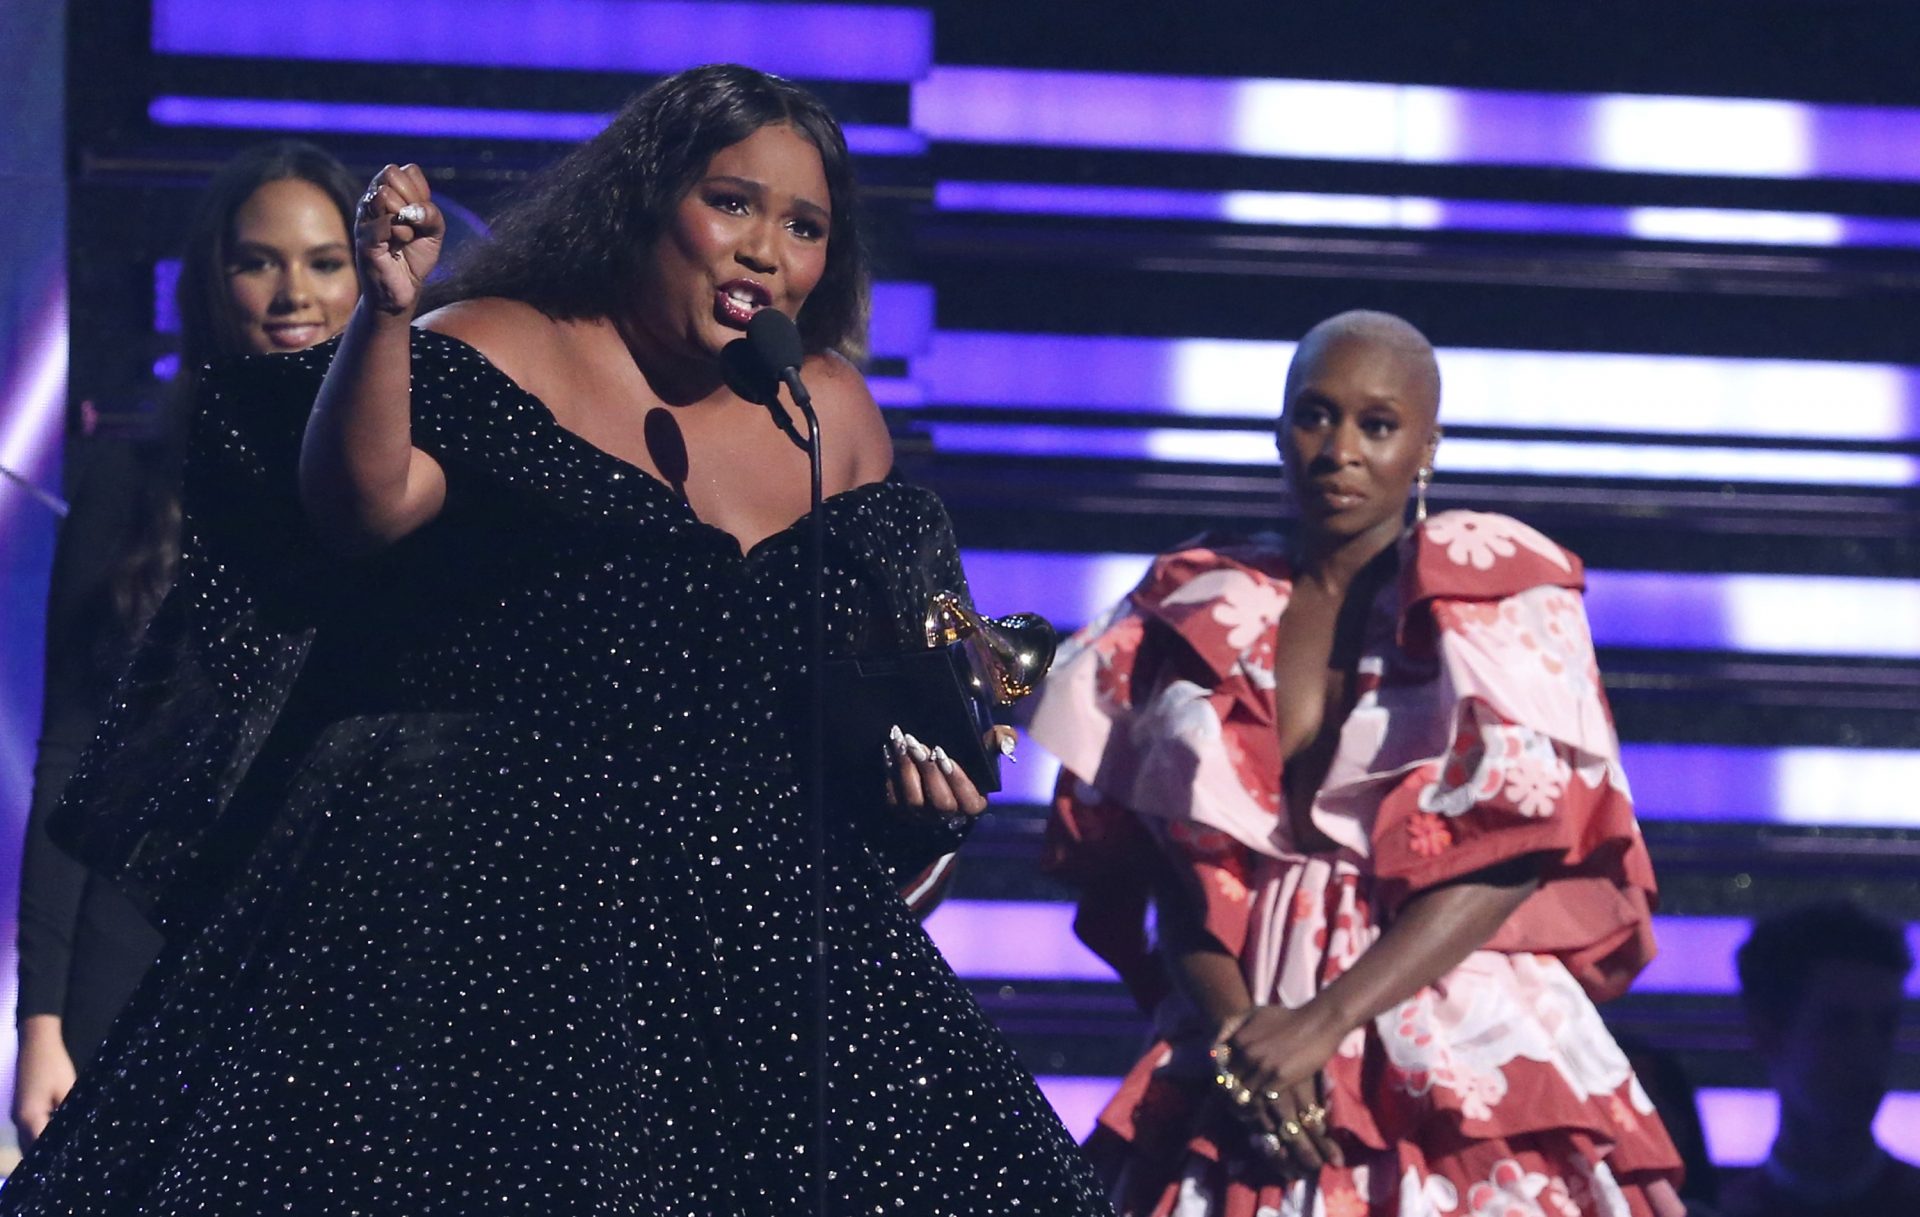 Lizzo accepts the award for best pop solo performance for "Truth Hurts" at the 62nd annual Grammy Awards on Sunday, Jan. 26, 2020, in Los Angeles. Looking on at right is Cynthia Erivo.